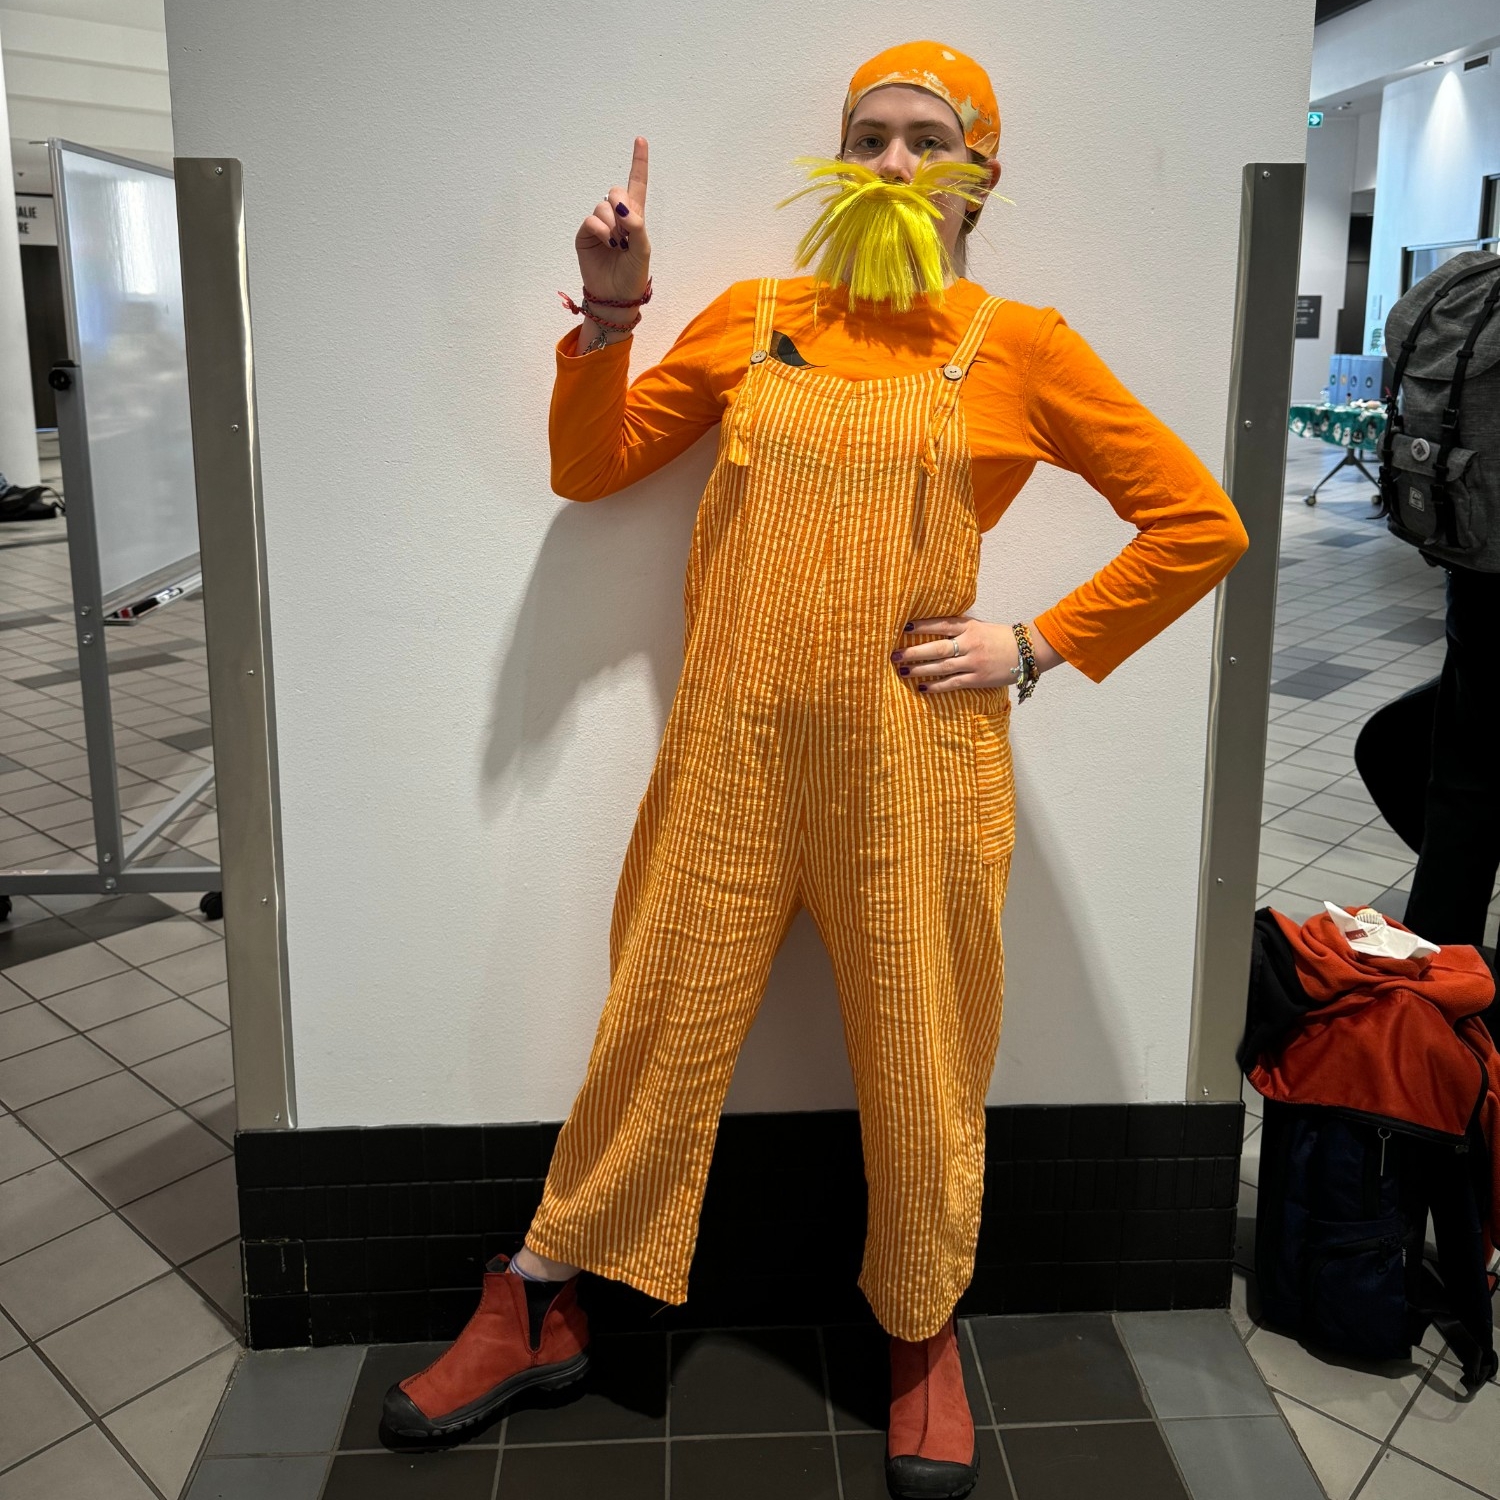 Person dressed up as The Lorax from the Dr. Seuss book, at 2023 Halloween Social